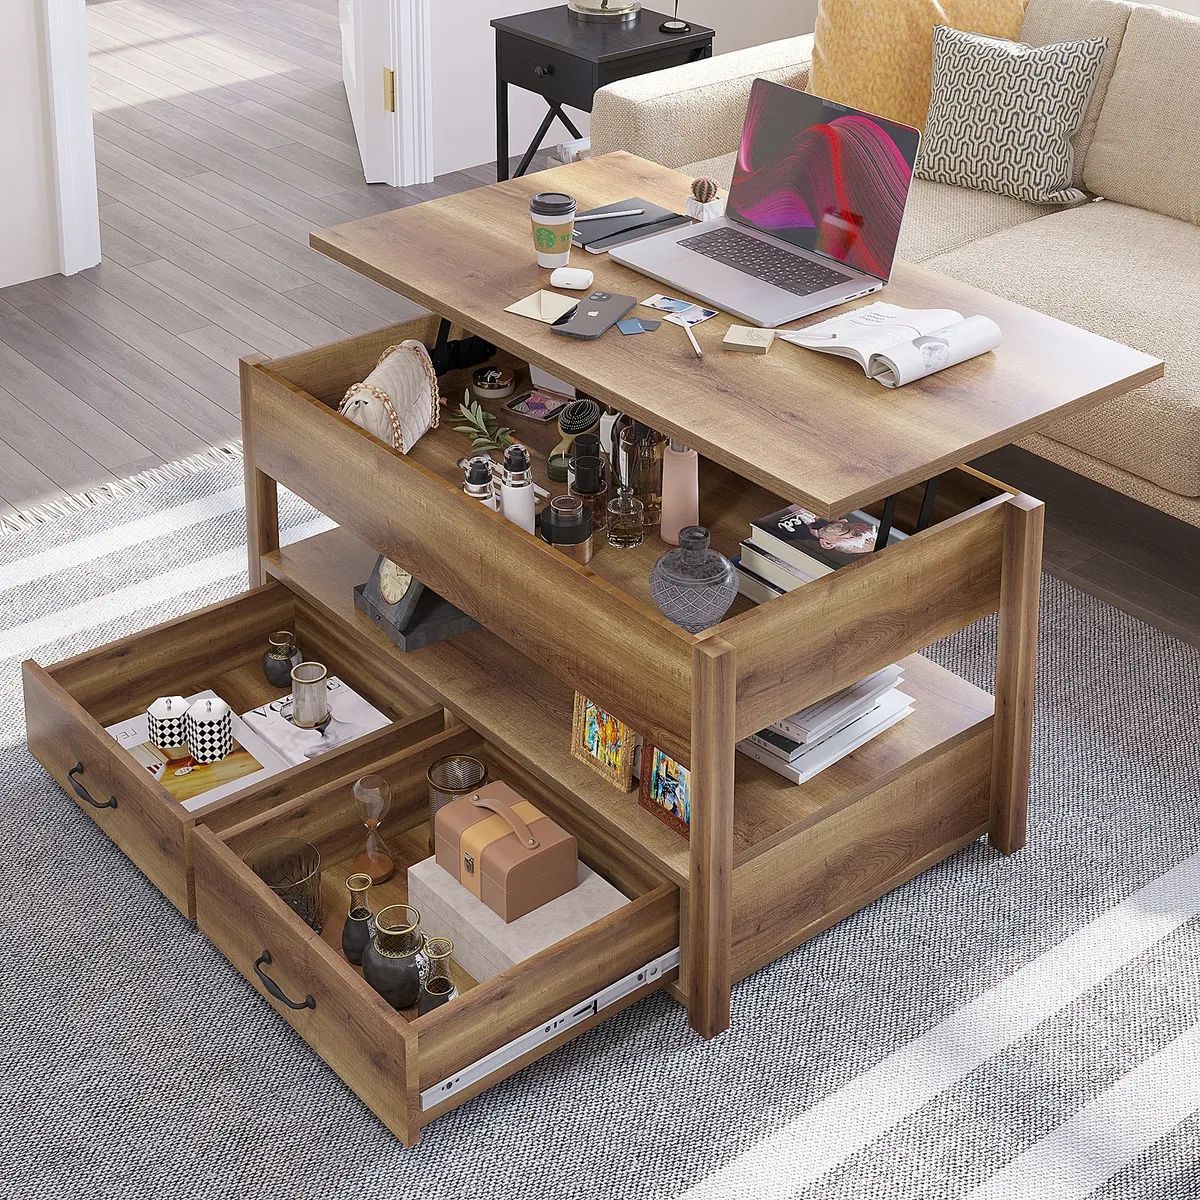 2 Drawer Lift Top Coffee Table Wooden With Hidden Compartment & Storage  Shelves | Ebay Throughout Lift Top Coffee Tables With Shelves (View 5 of 15)